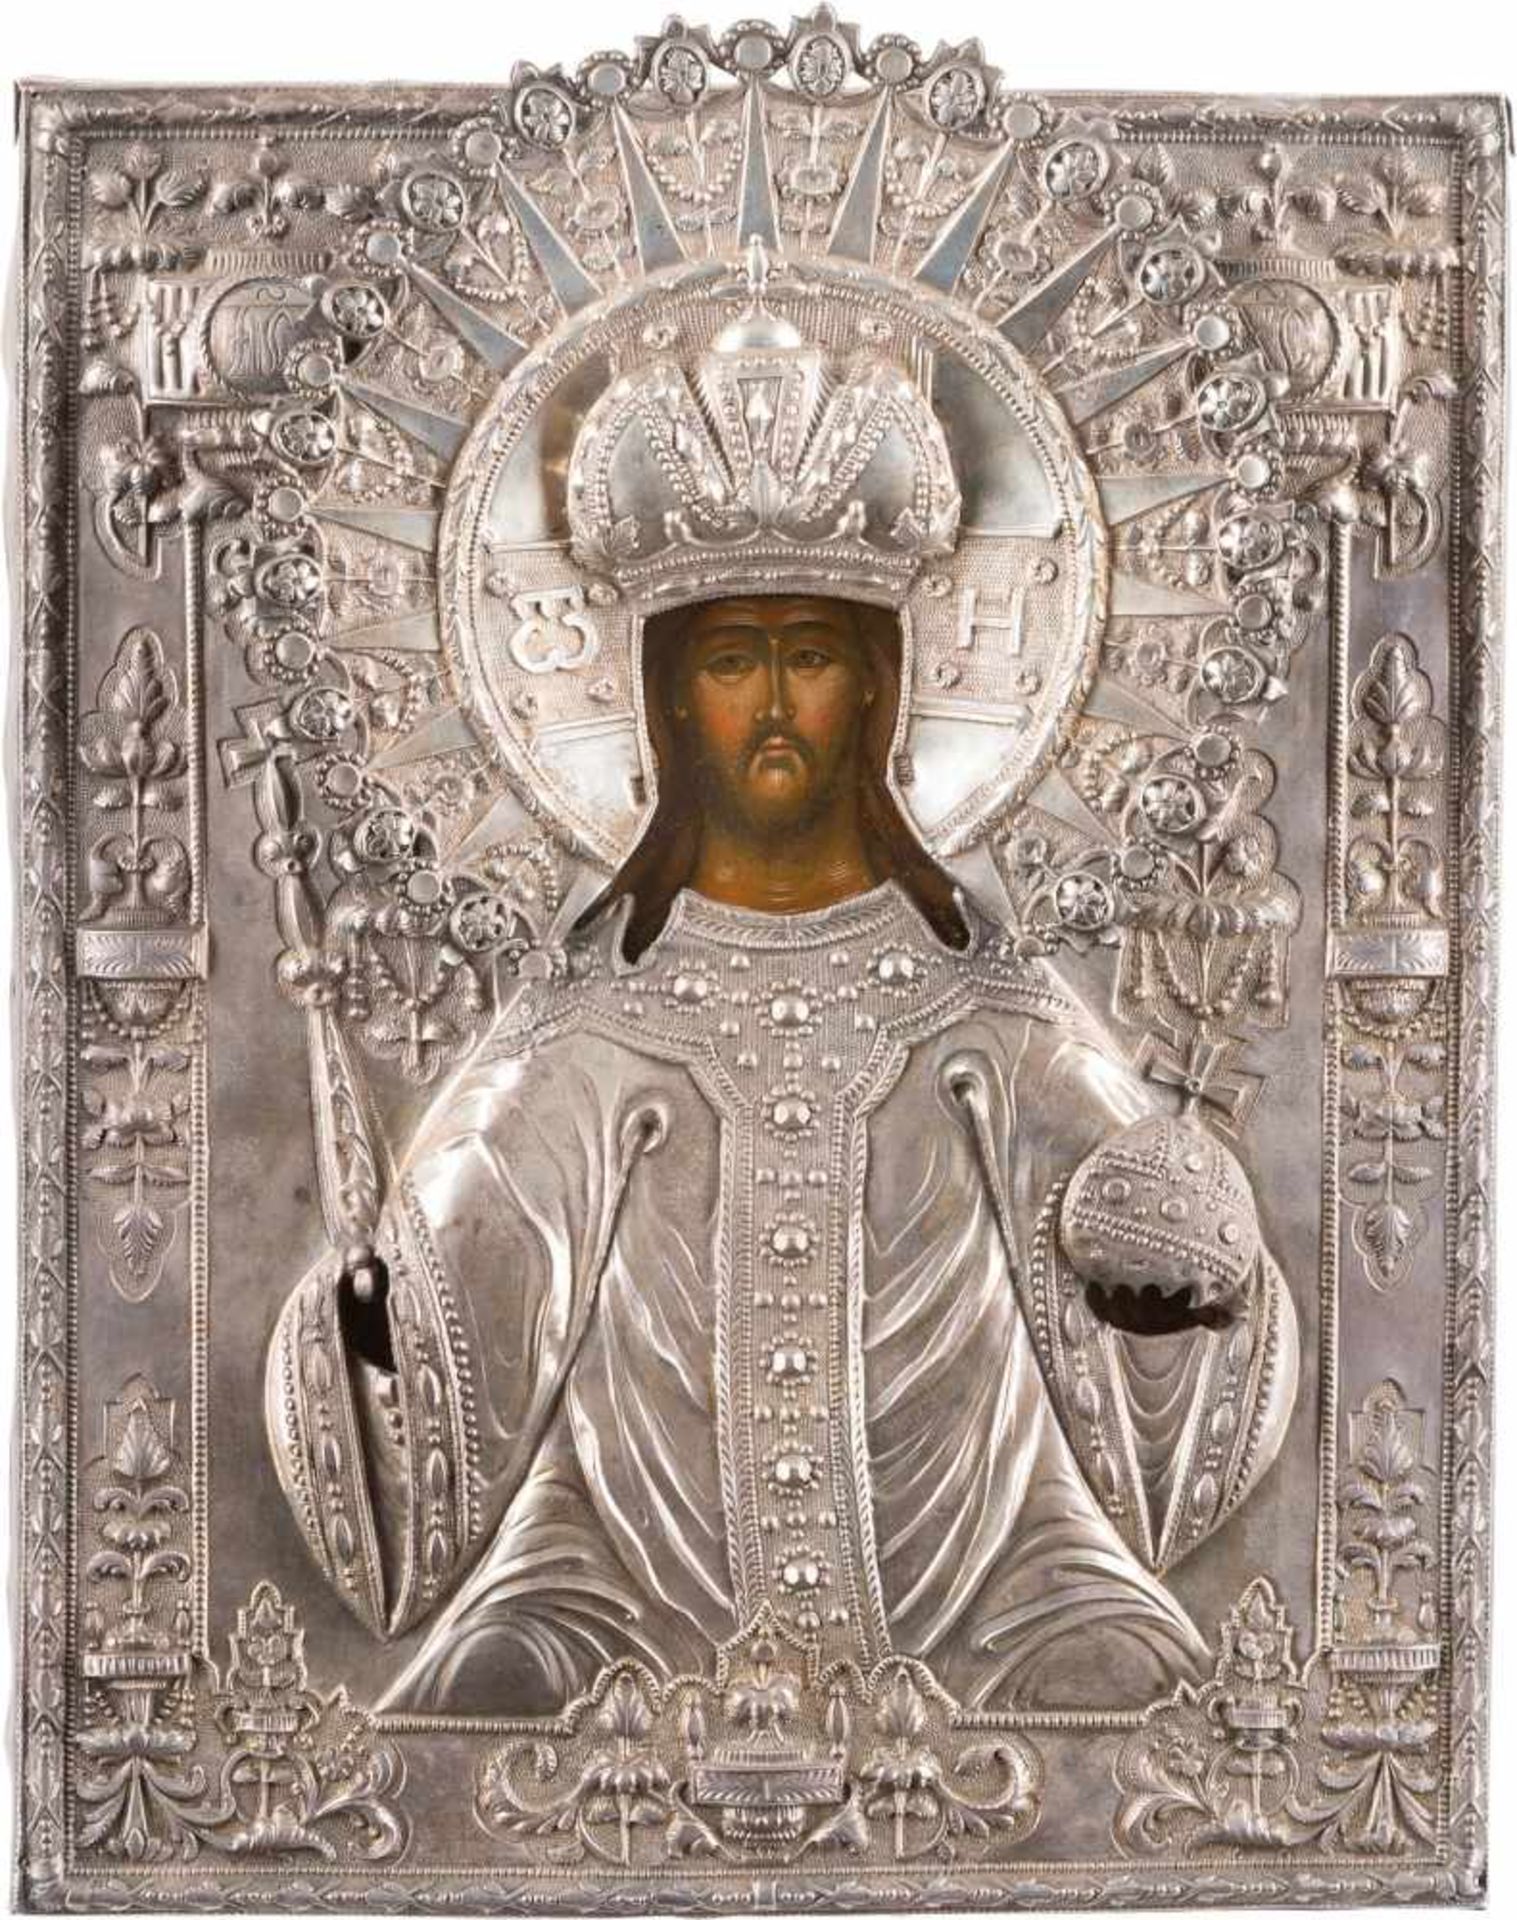 A RARE ICON SHOWING CHRIST THE HIGH PRIEST WITH A SILVER OKLAD